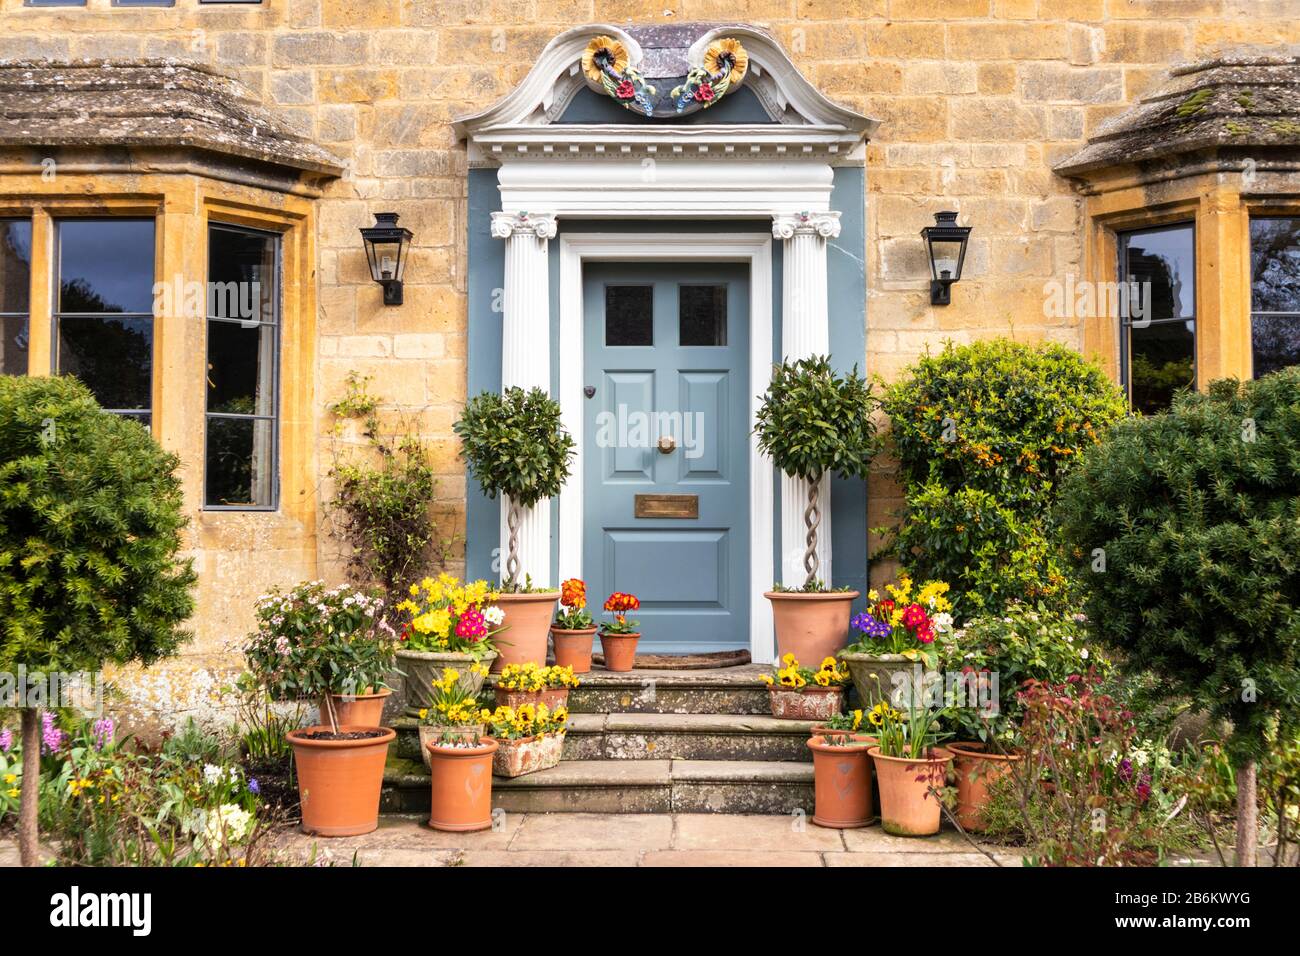 A display of spring flowers in pots outside a stone house in the Cotswold village of Broadway, Worcestershire UK Stock Photo